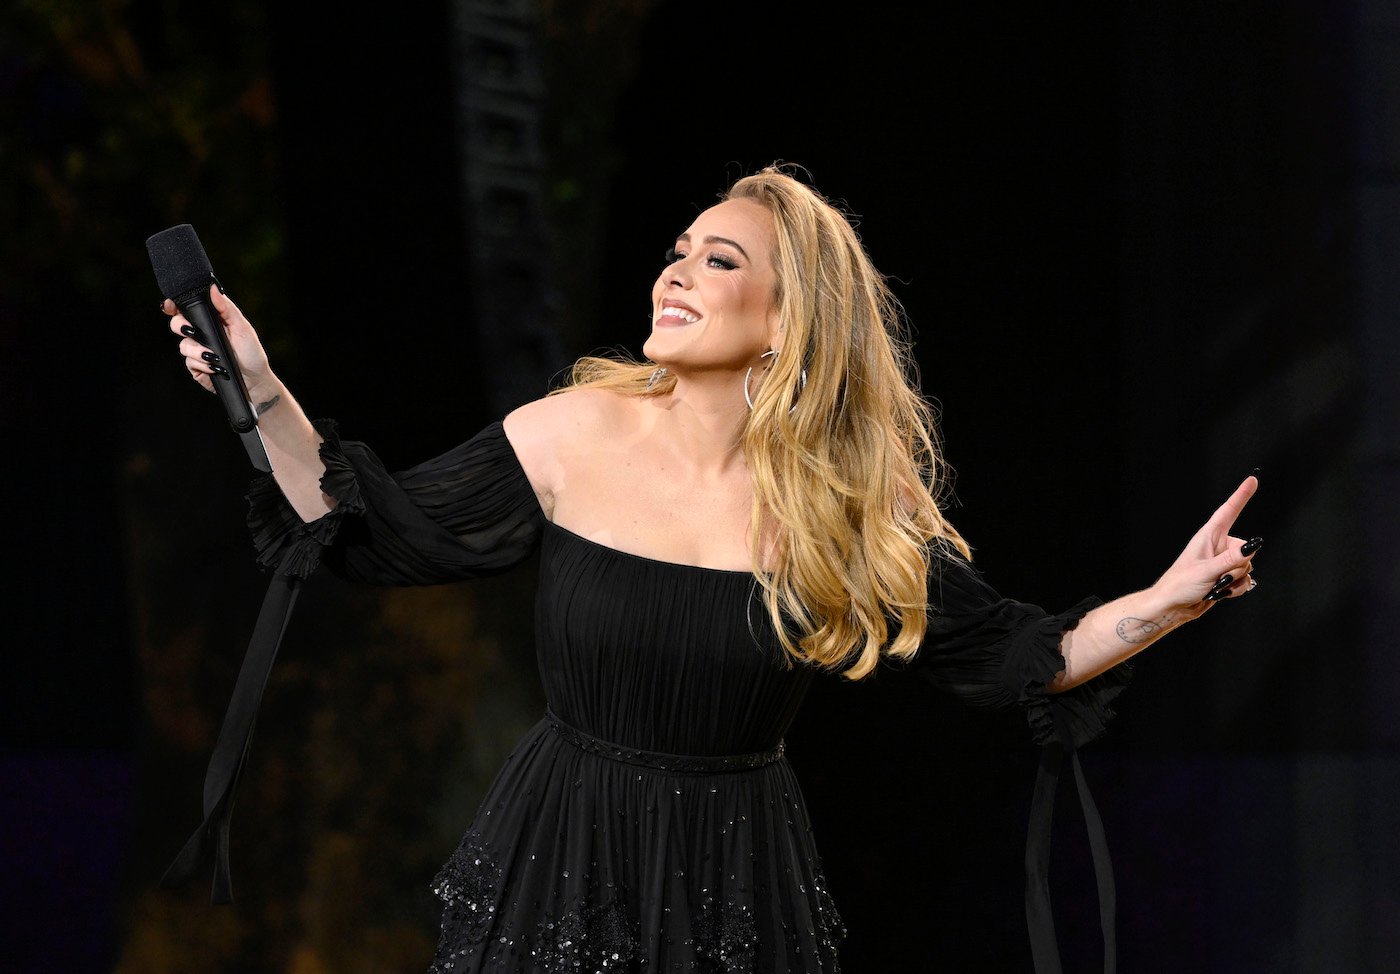 Adele, who is one award away from an EGOT, performing in black.